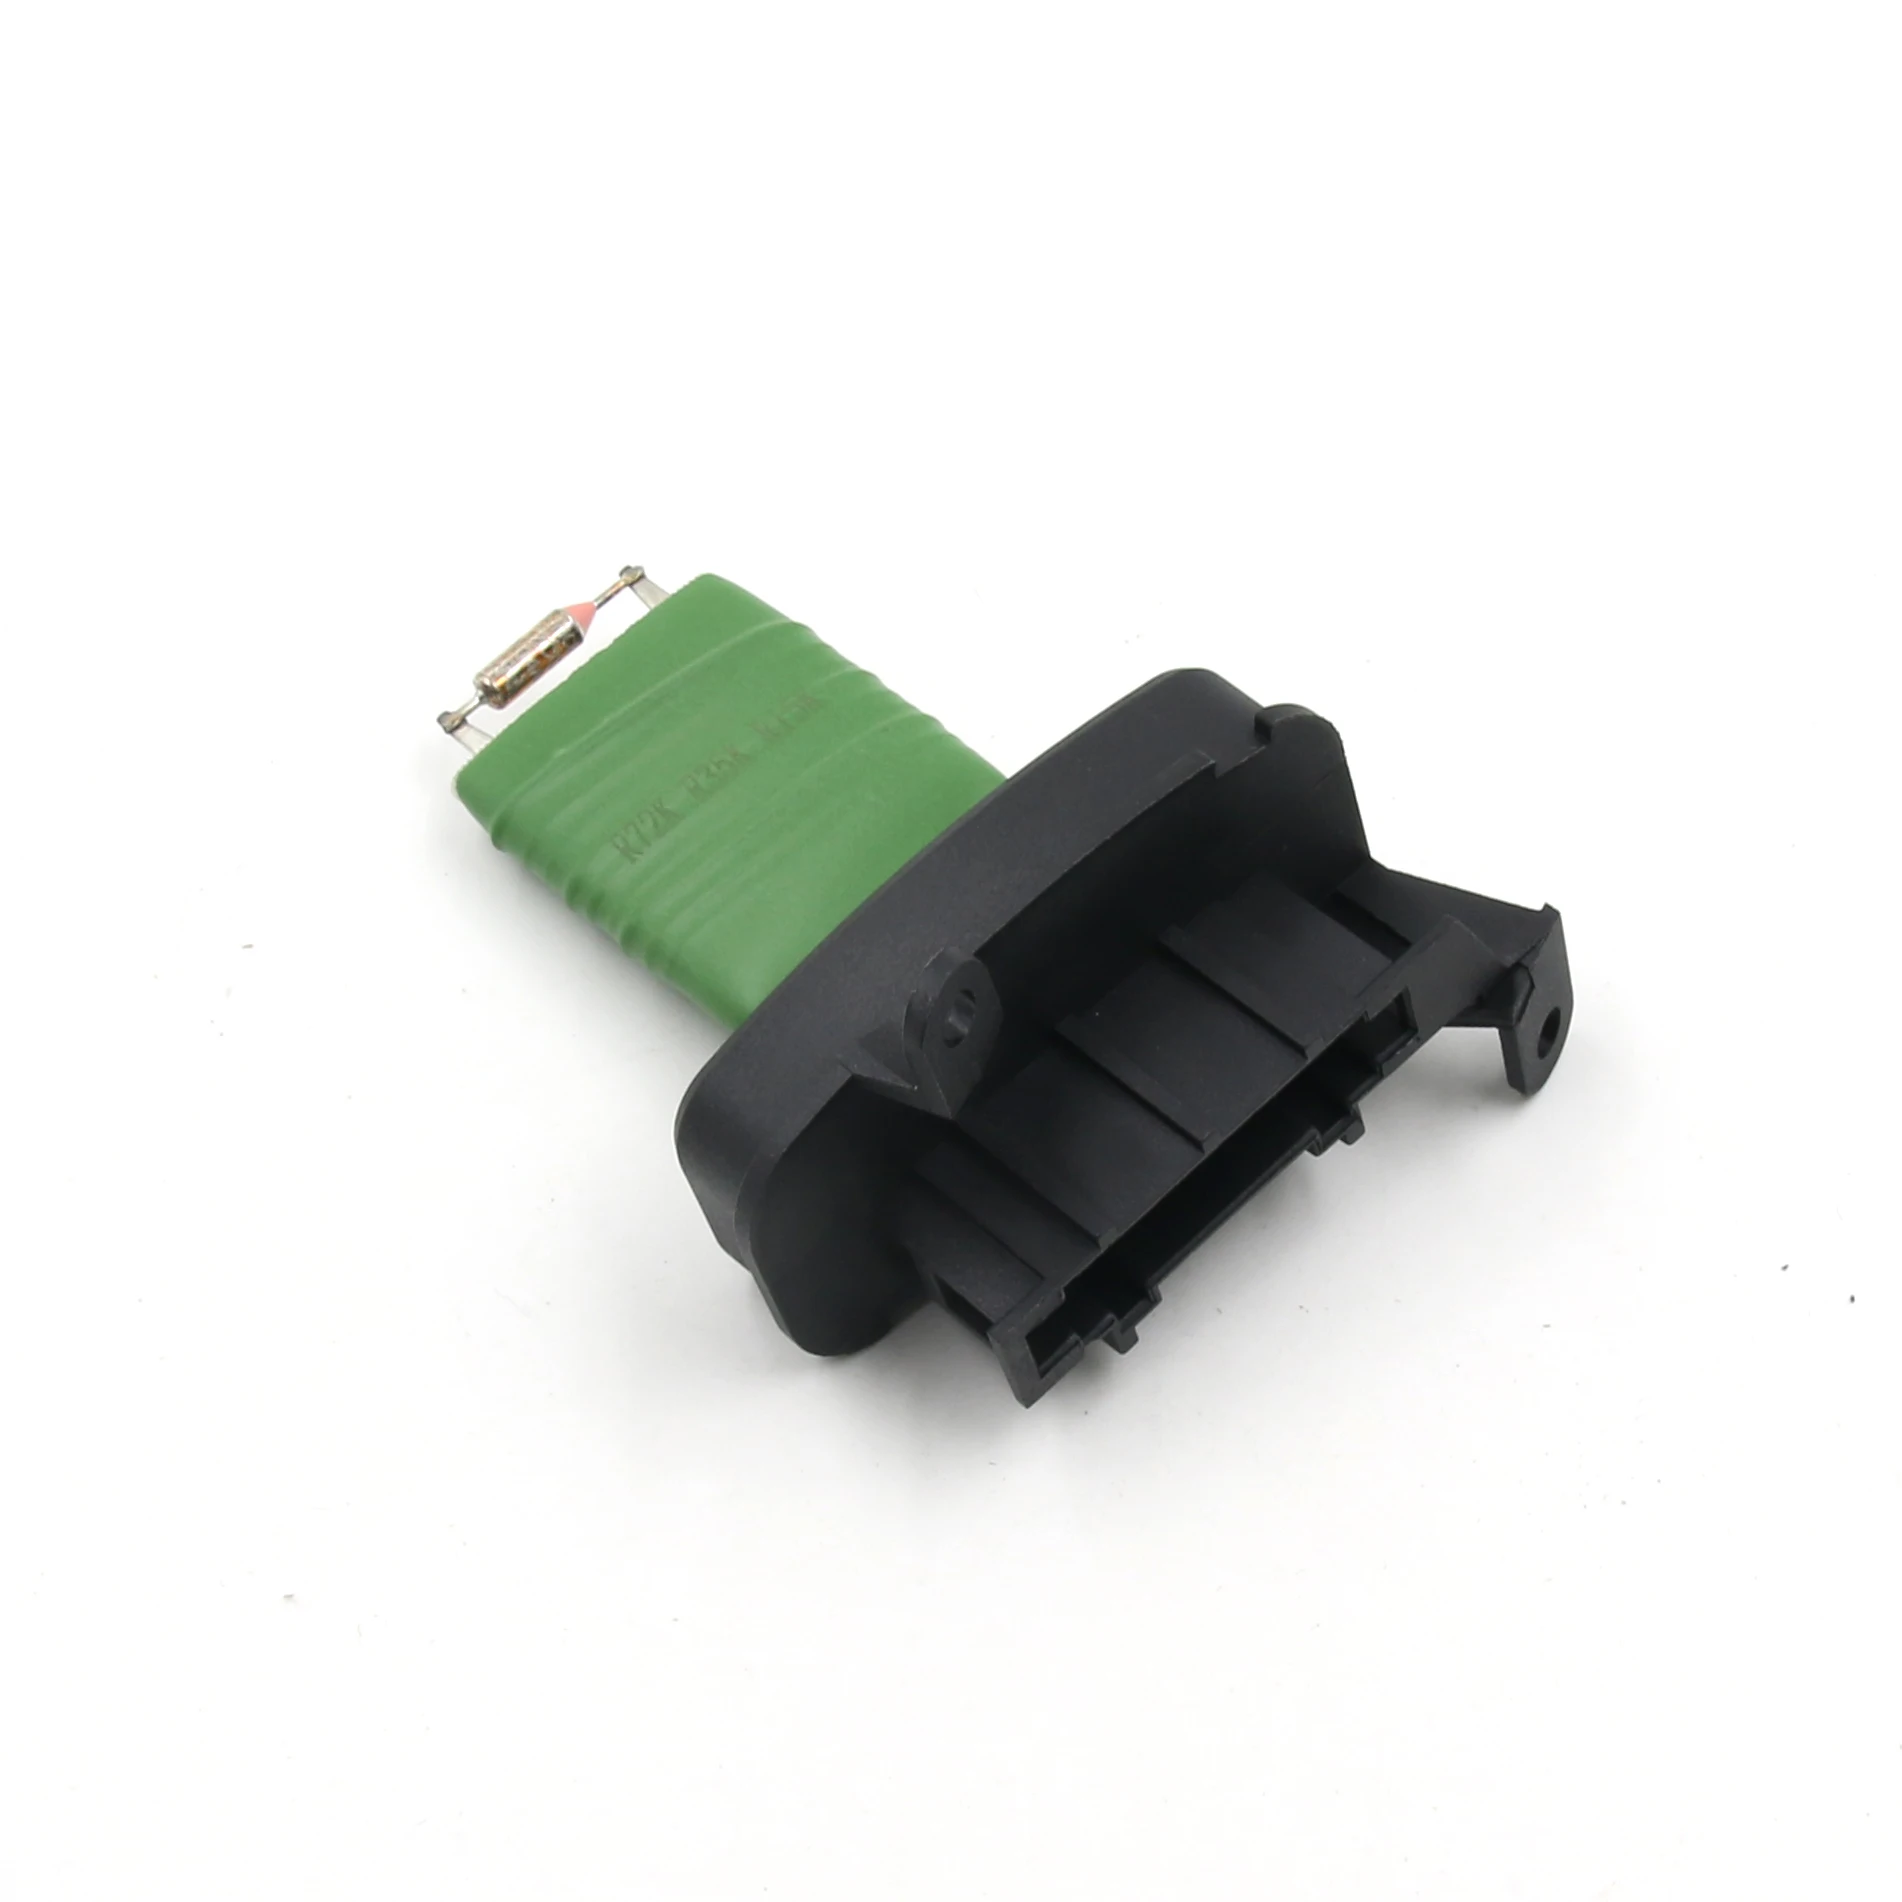 

High Quality New Blower Motor Fan Heater Resistor 18212560 0018212560 For Mercedes Vito W638 V Class 1995-2003